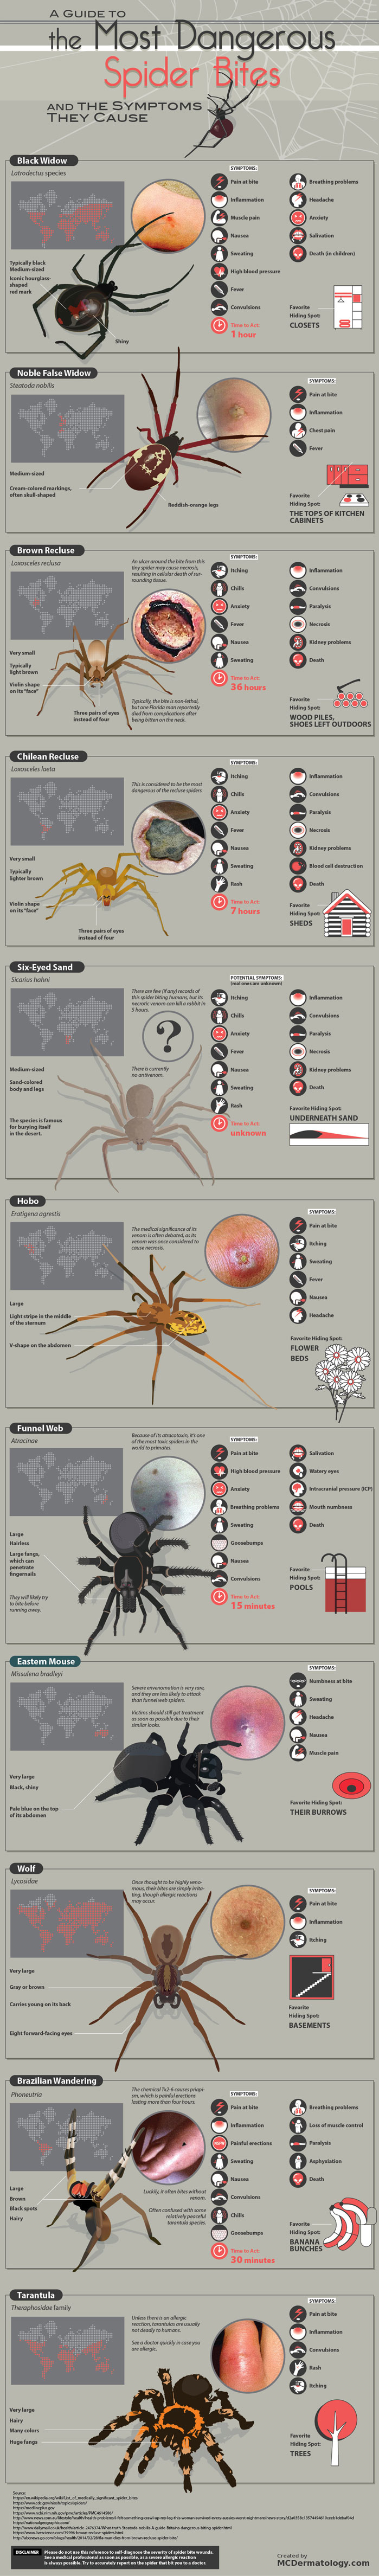 The Most Dangerous Spider Bites [Infographic] - Best Infographics